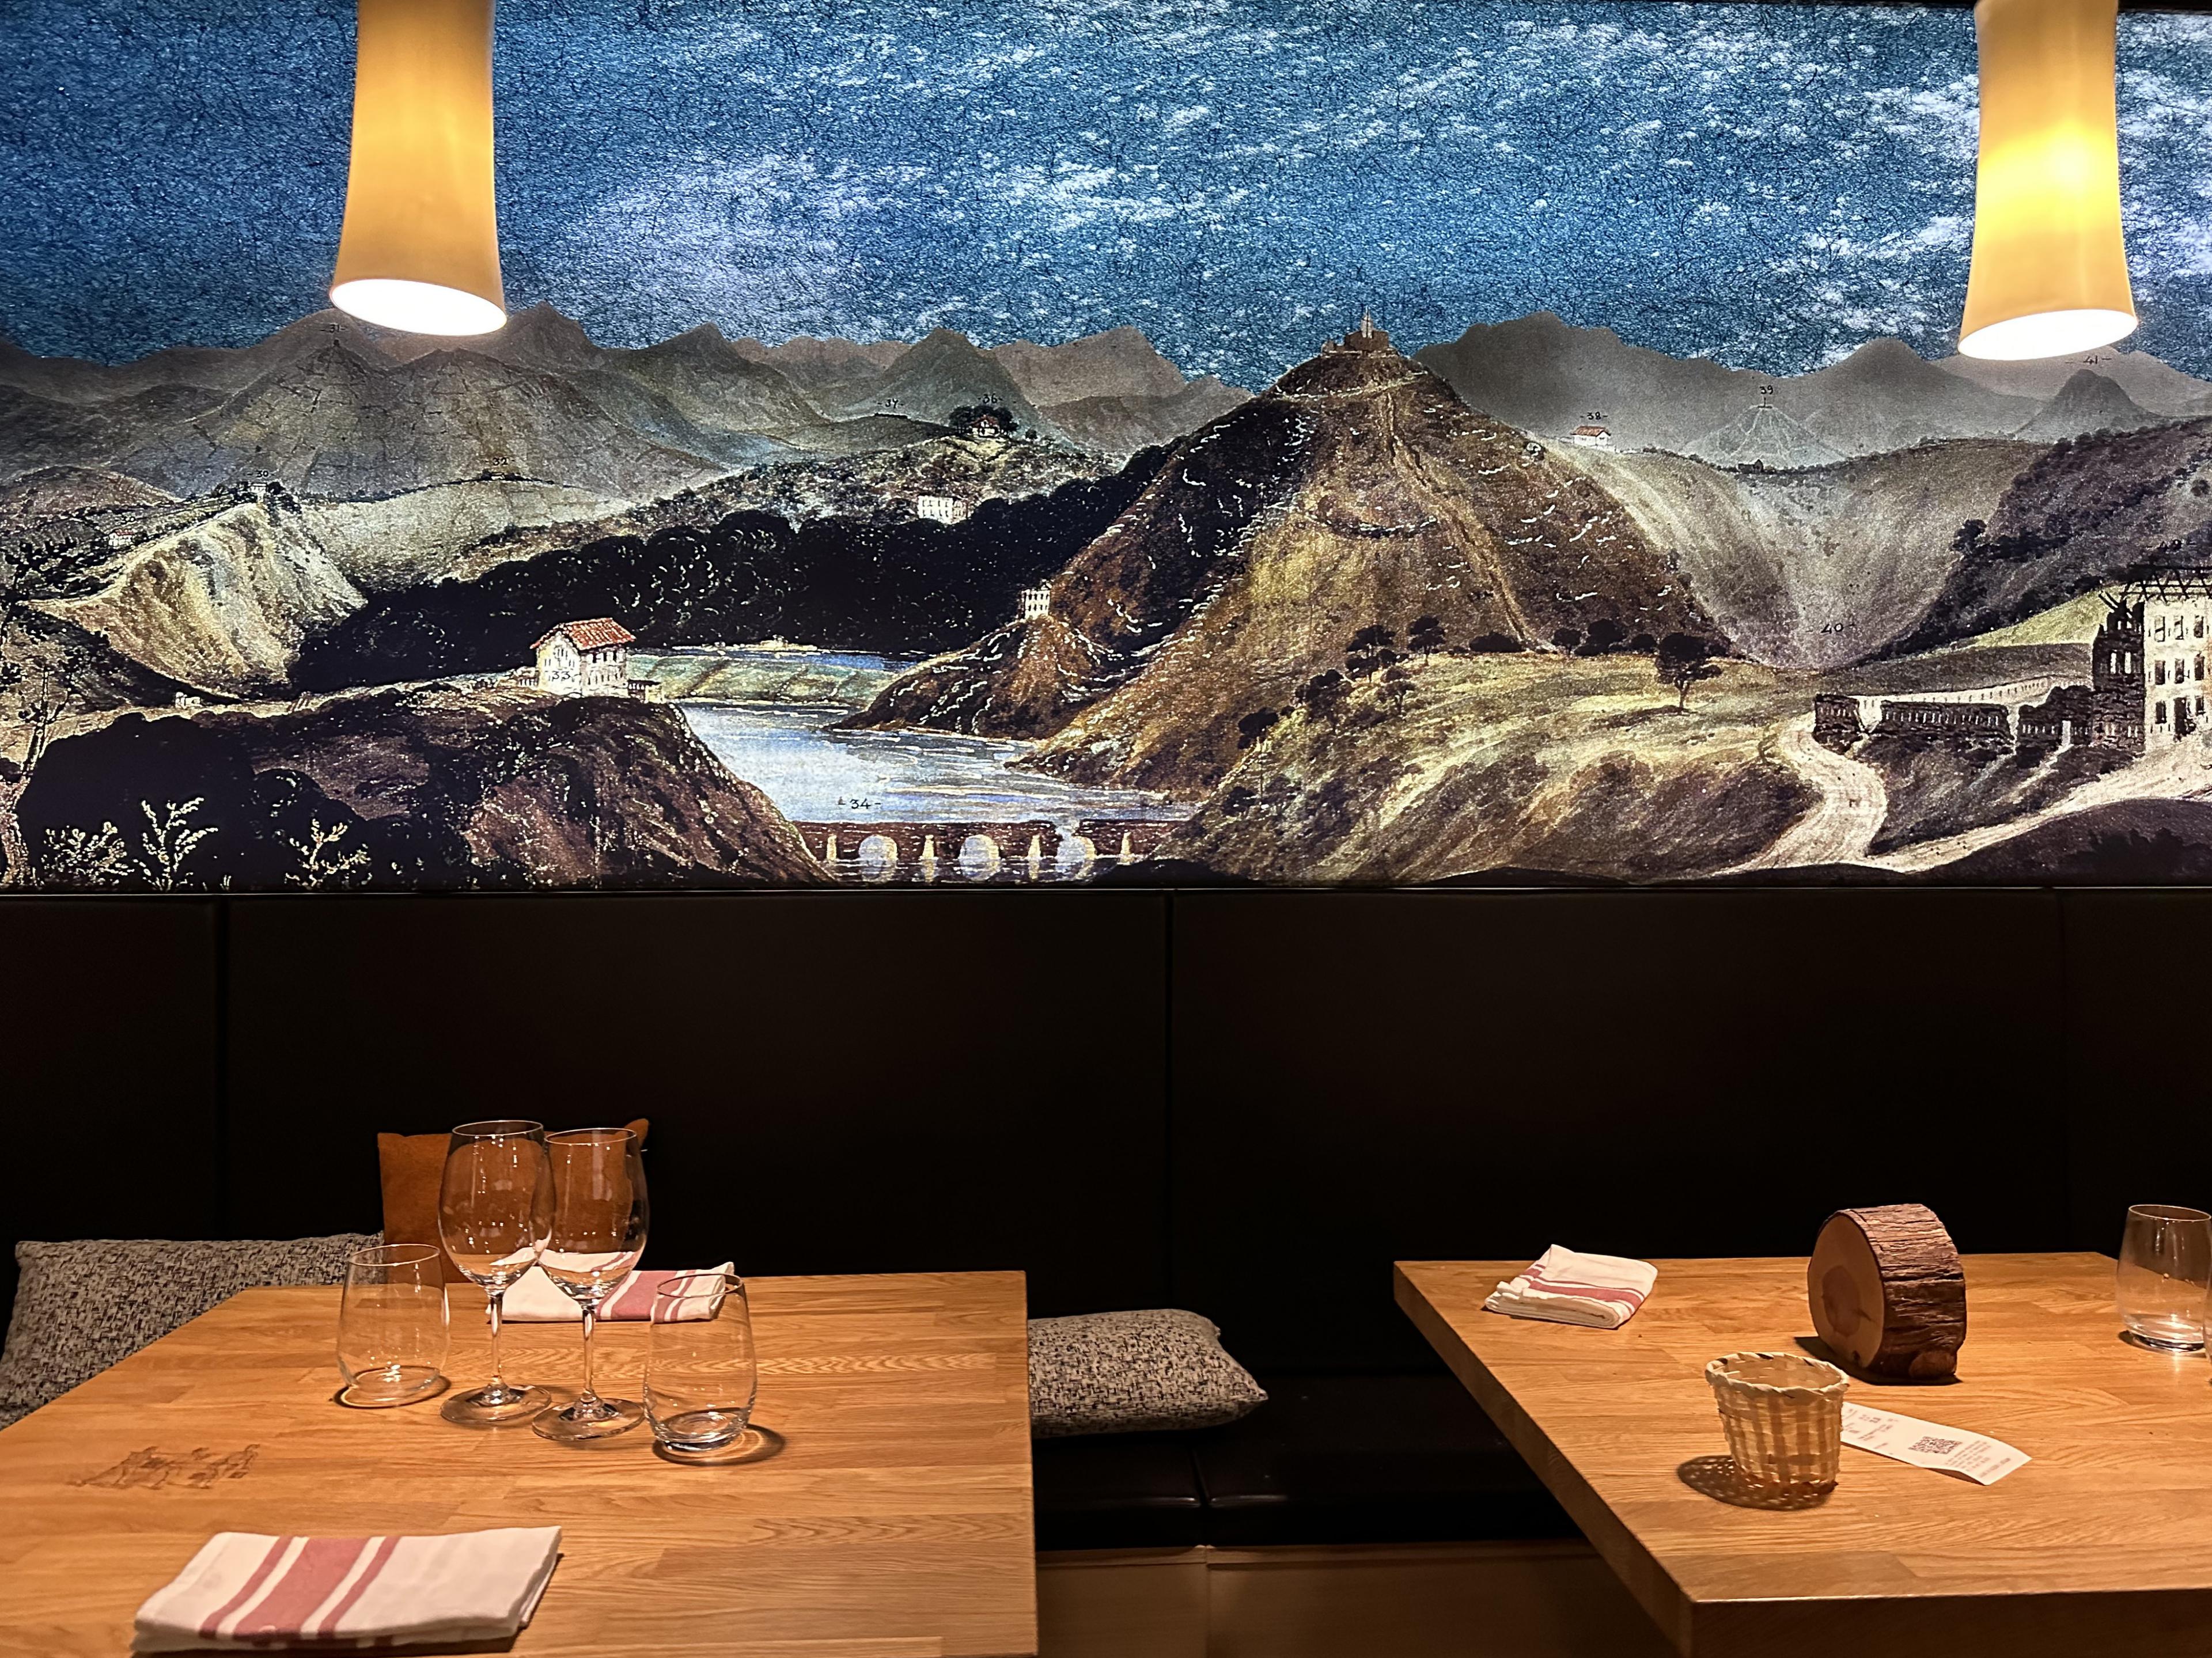 restaurant table with a starry night over mountains painted on the wall